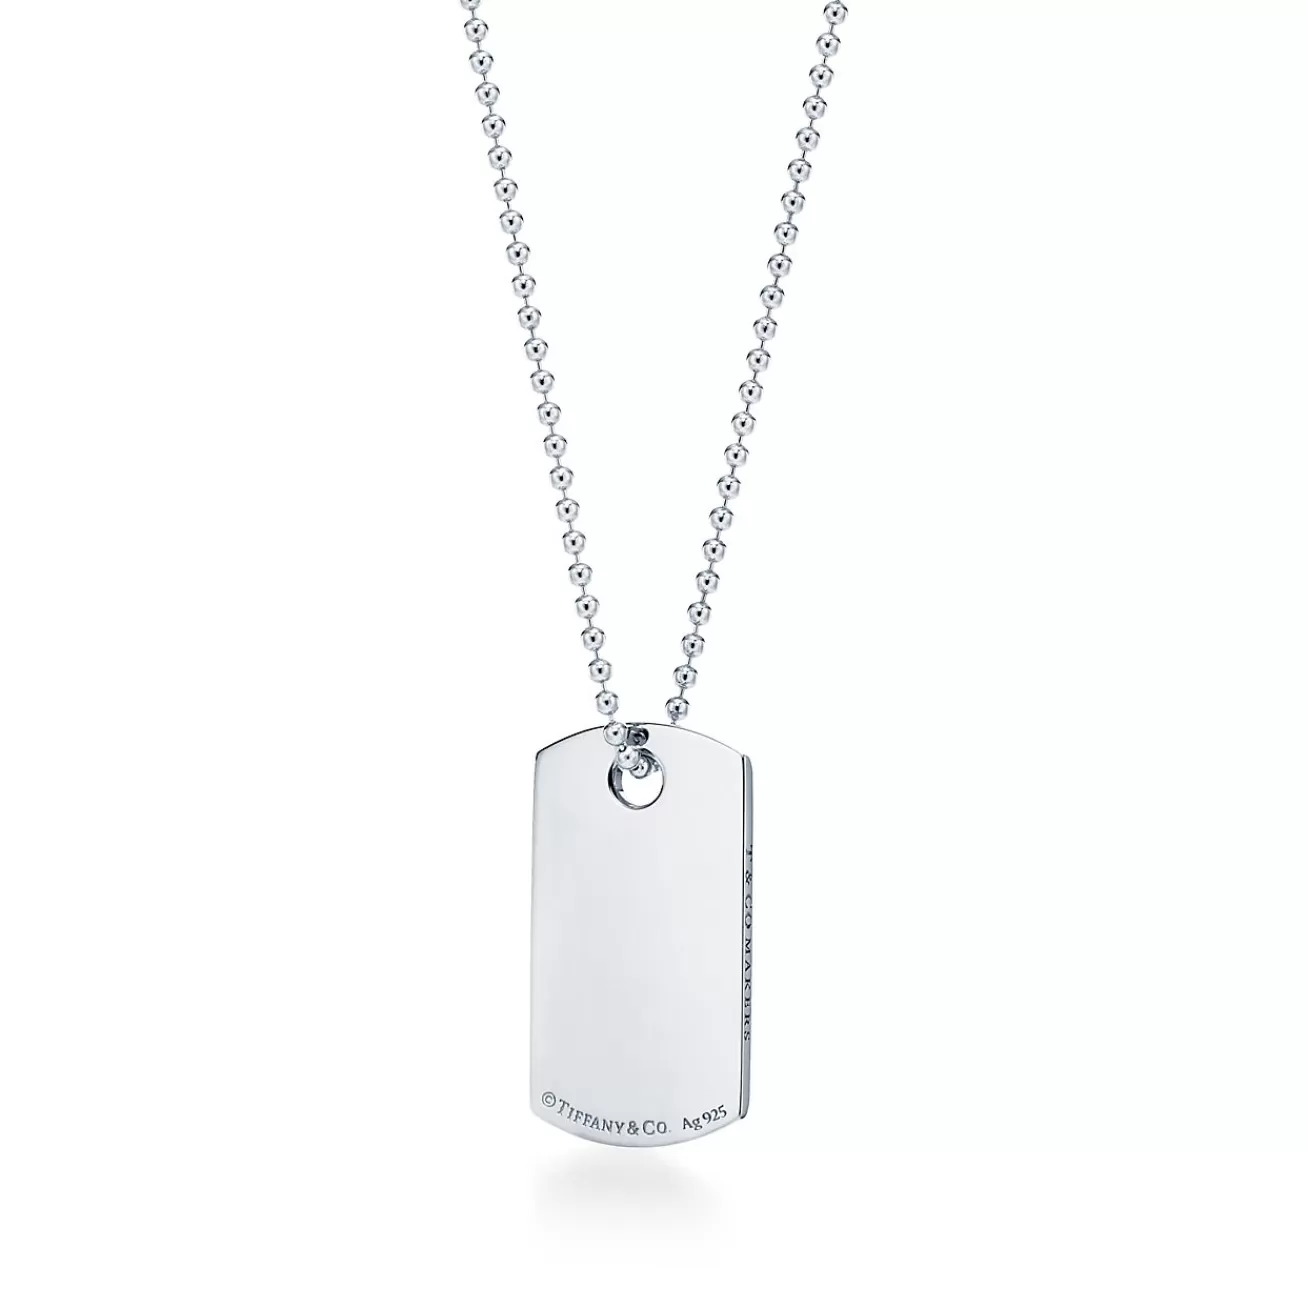 Tiffany & Co. Tiffany 1837® Makers I.D. tag pendant in sterling silver, 24". | ^ Necklaces & Pendants | Men's Jewelry